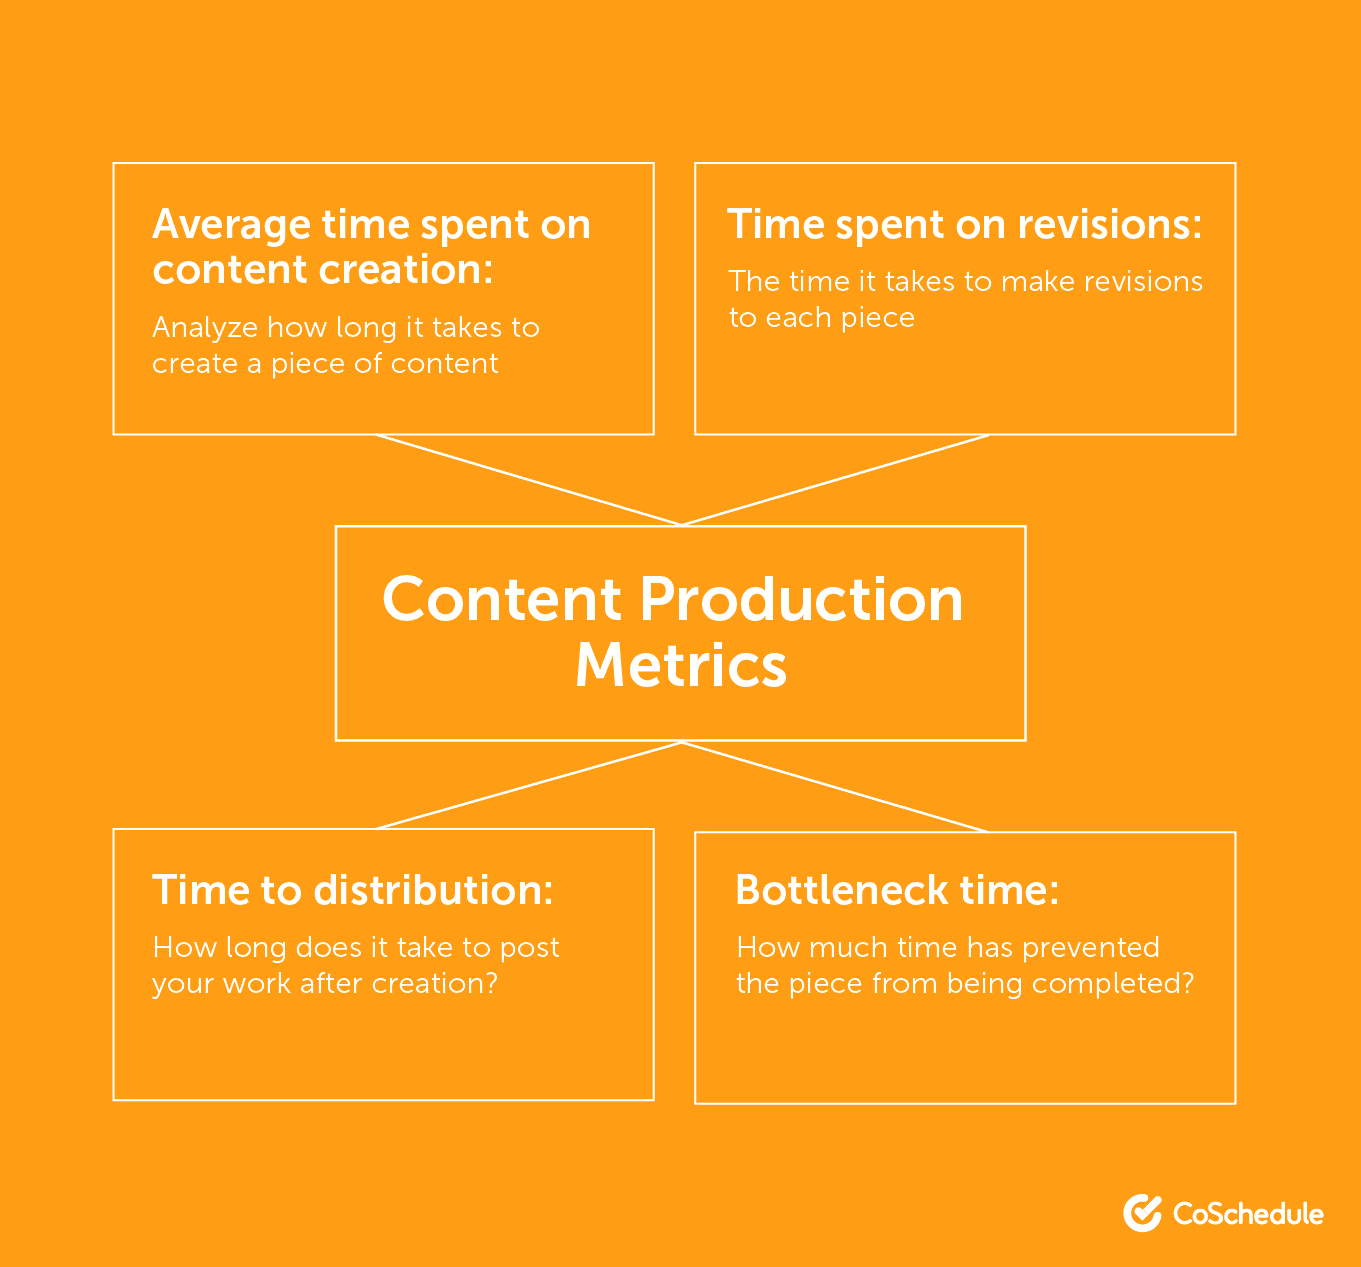 Content Production Metrics include, Average time spent on content, time spent on revisions, time to distribute, and bottleneck time